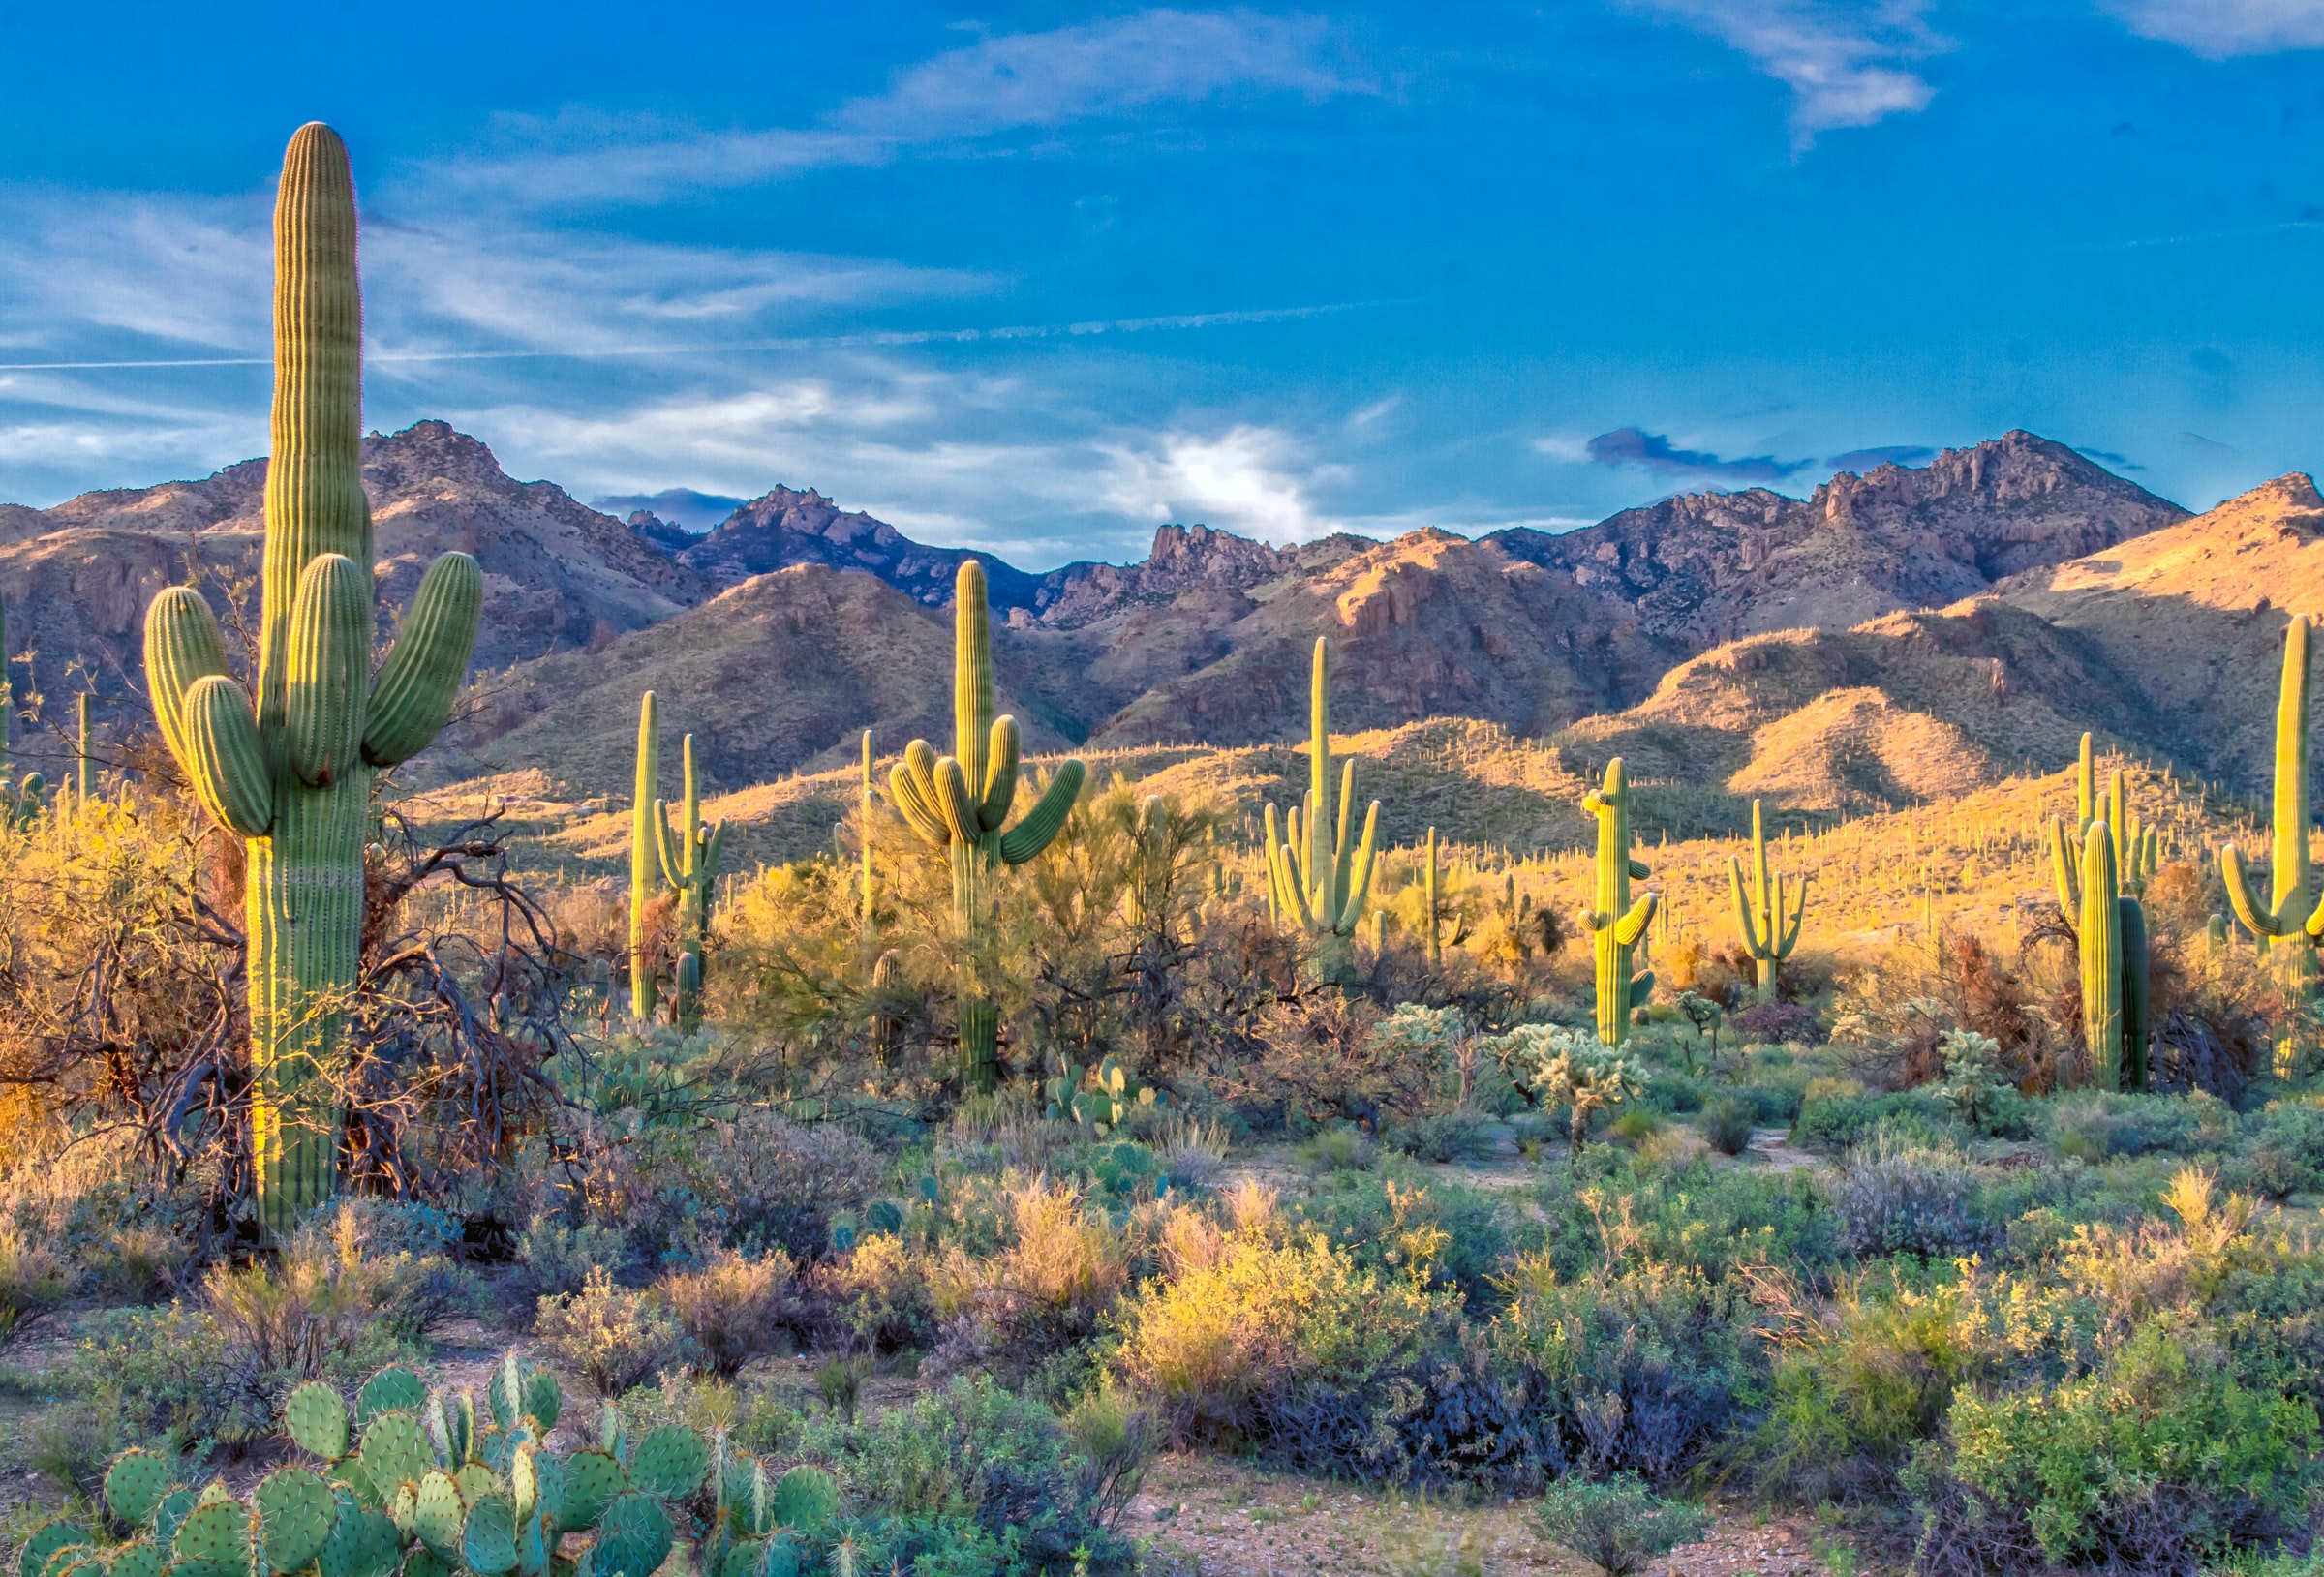 15 Facts About Latino Well-Being in Arizona